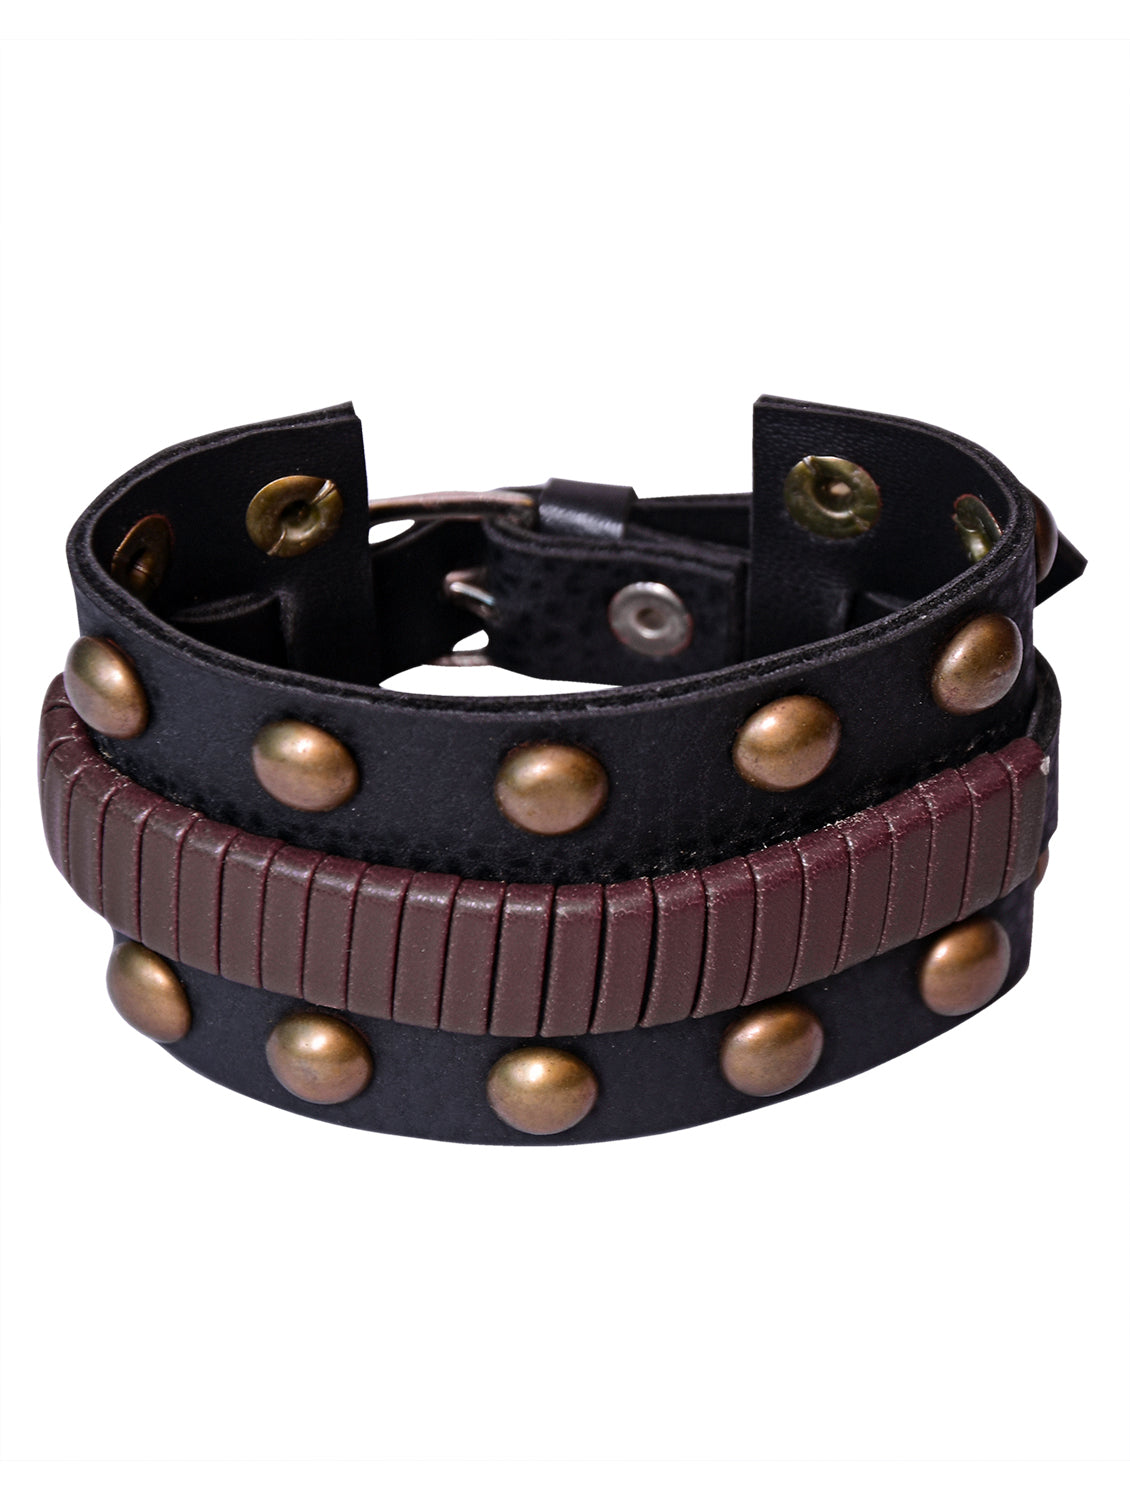 image for Trendy Designs Faux Leather Wrist Band Bracelet